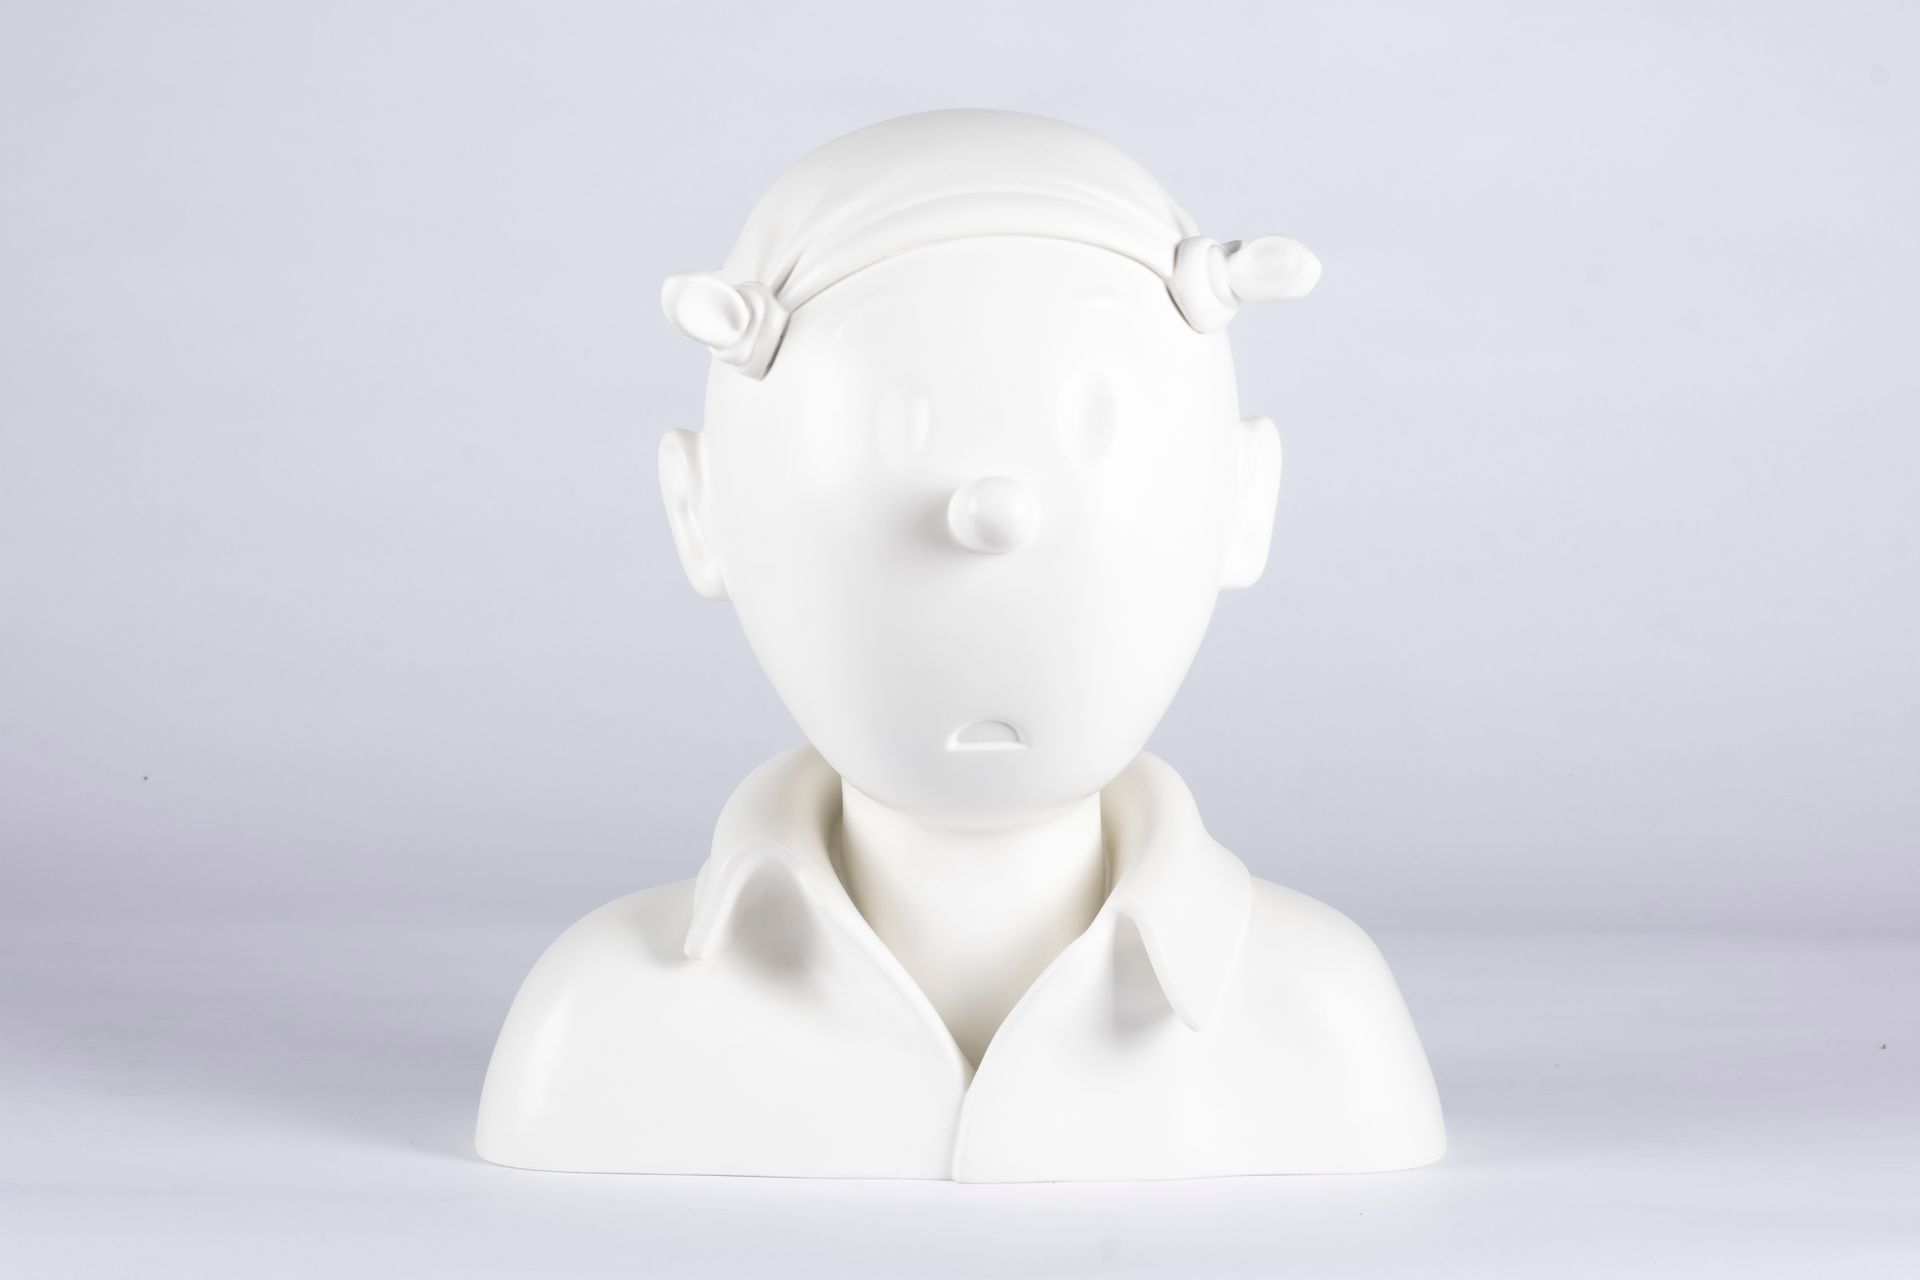 HERGÉ, Georges Remi dit (1907-1983) 
White bust of Tintin with a handkerchief, b&hellip;